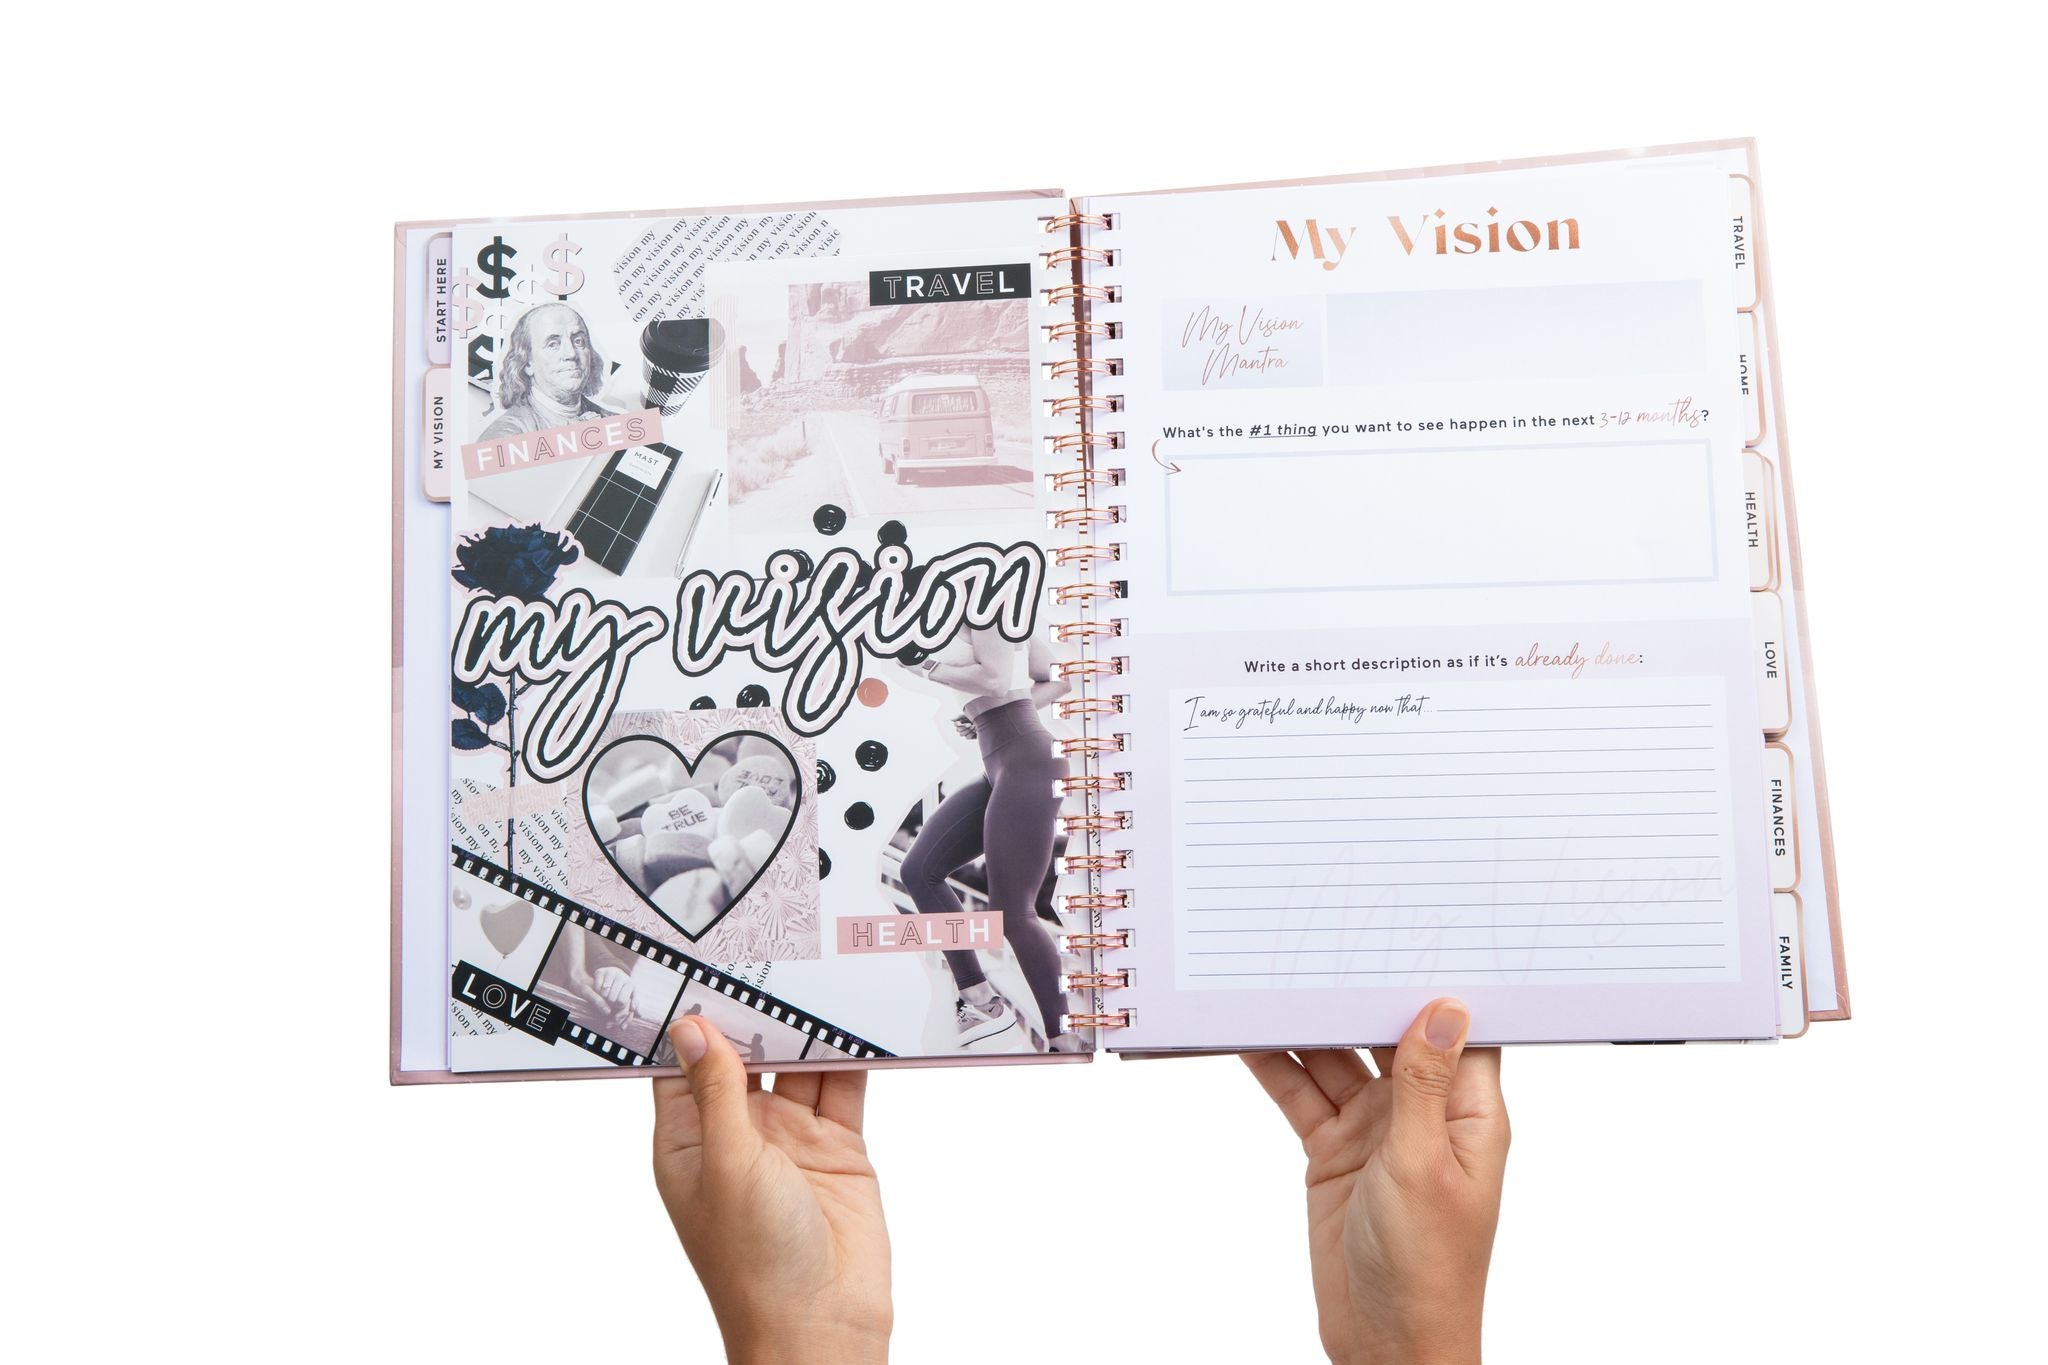 VISION BOARD KIT – Letters and Lucy